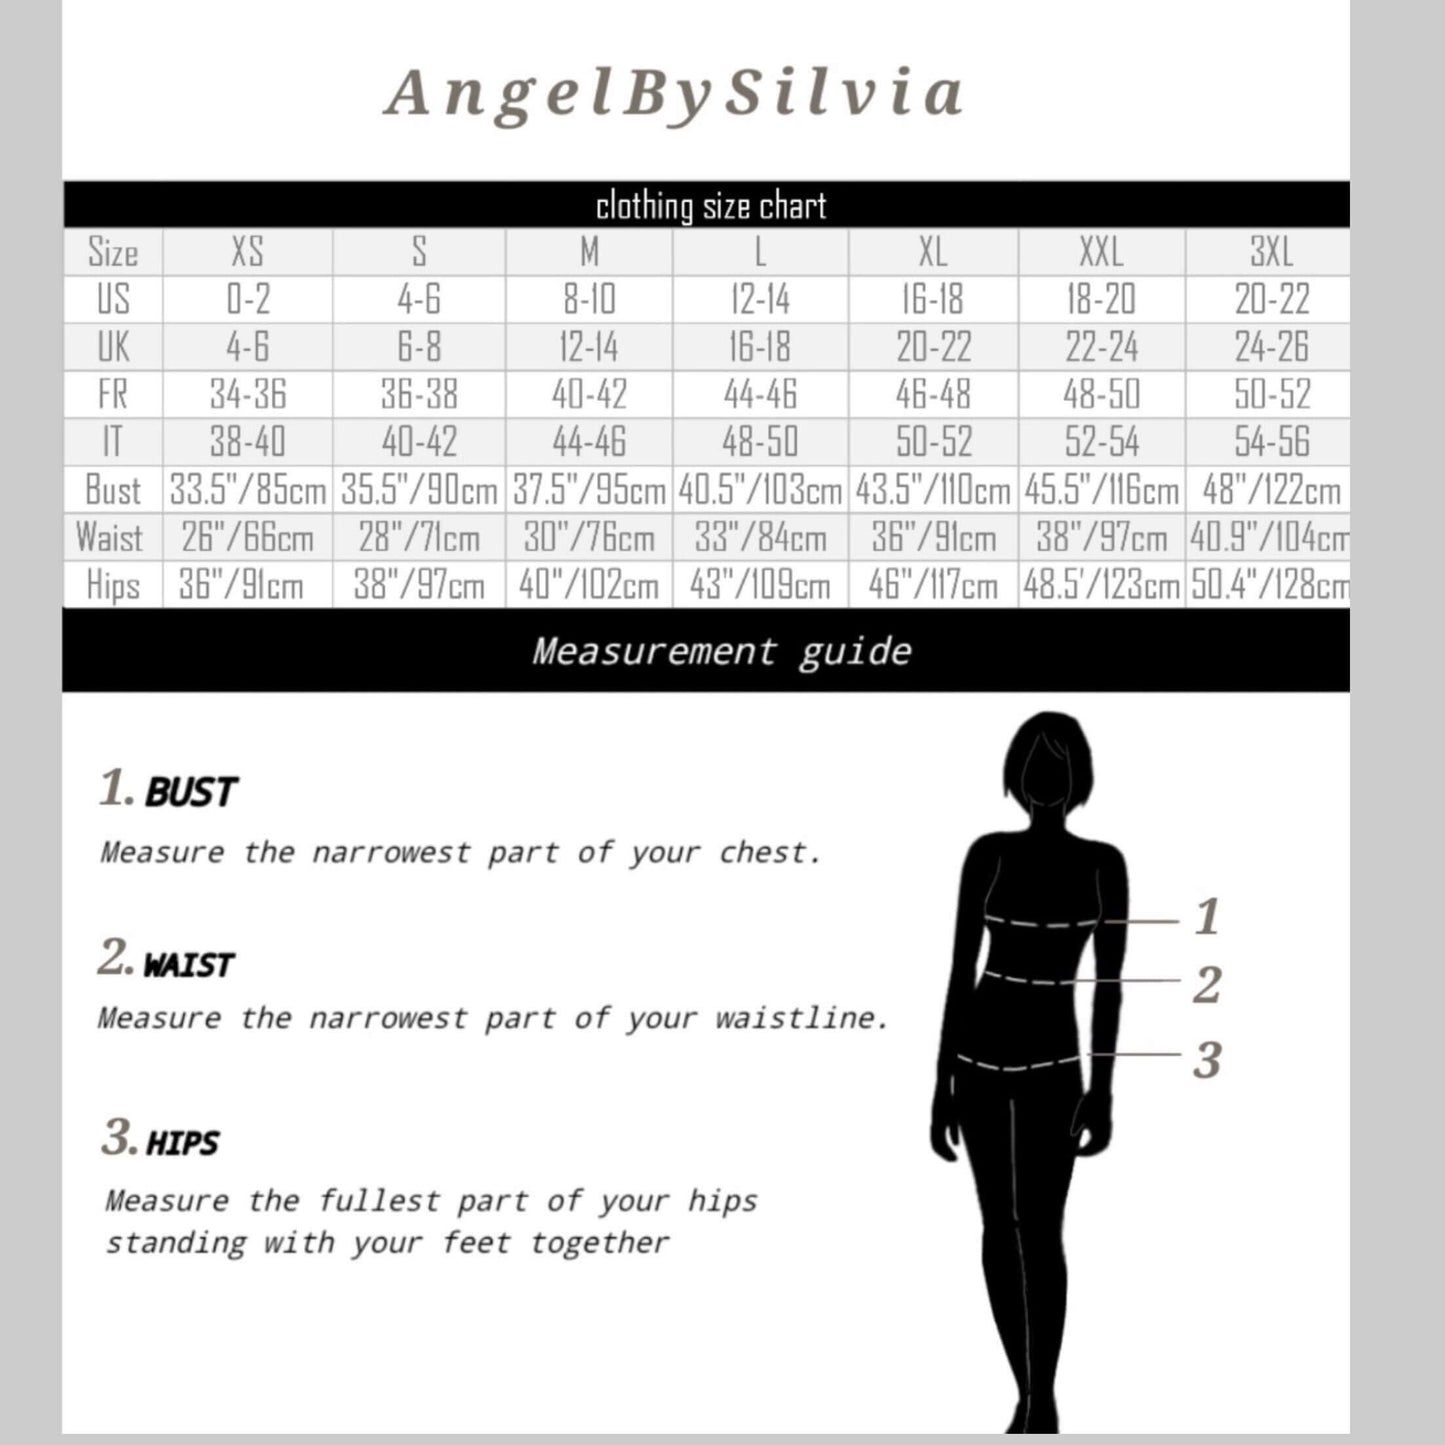 Comfortable Cotton Pants - Handmade clothing from AngelBySilvia - Top Designer Brands 